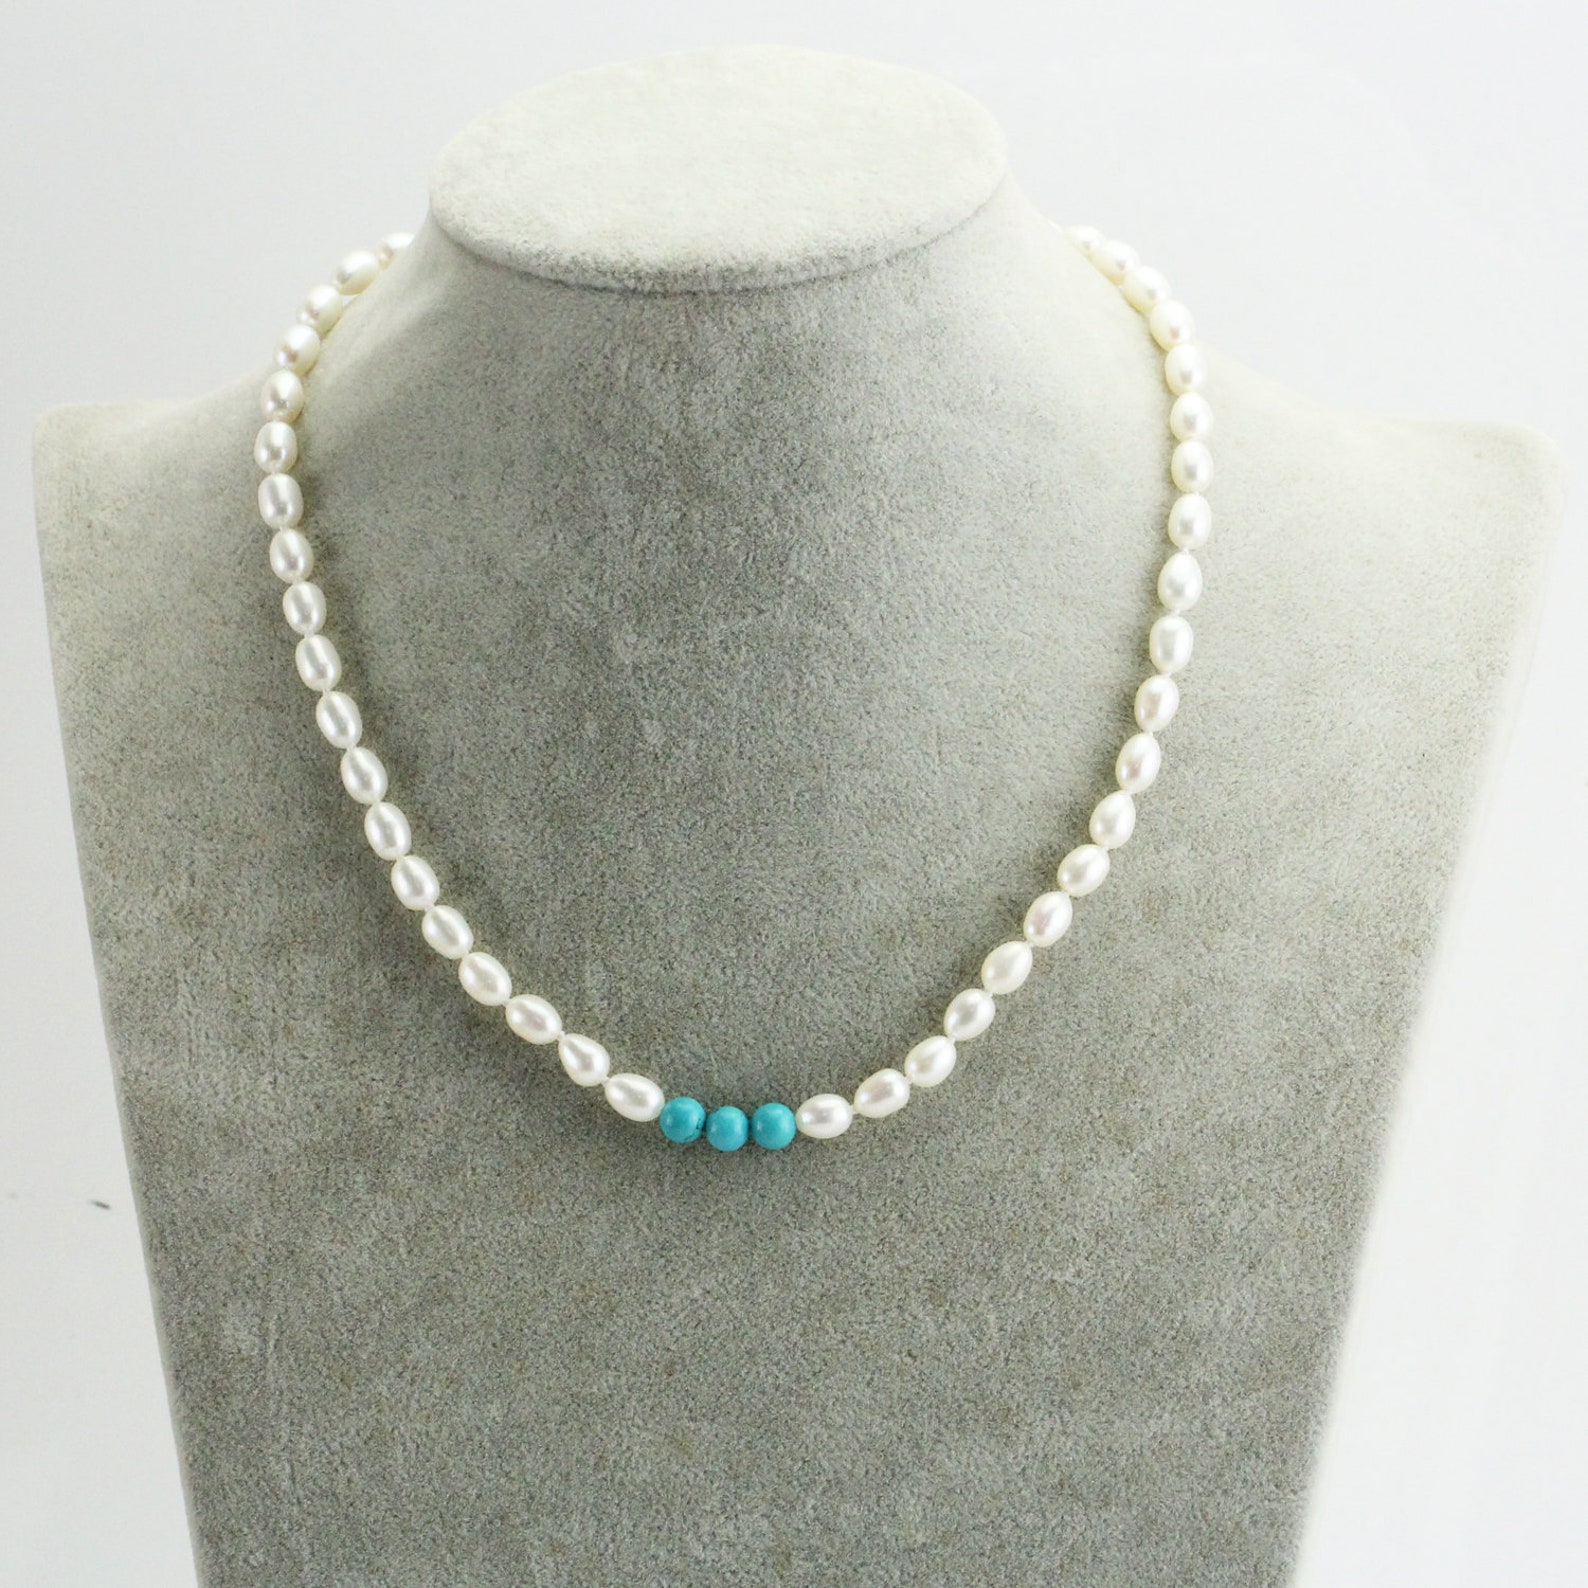 Turquoise and pearl necklacebridesmaid pearl necklacepearl | Etsy